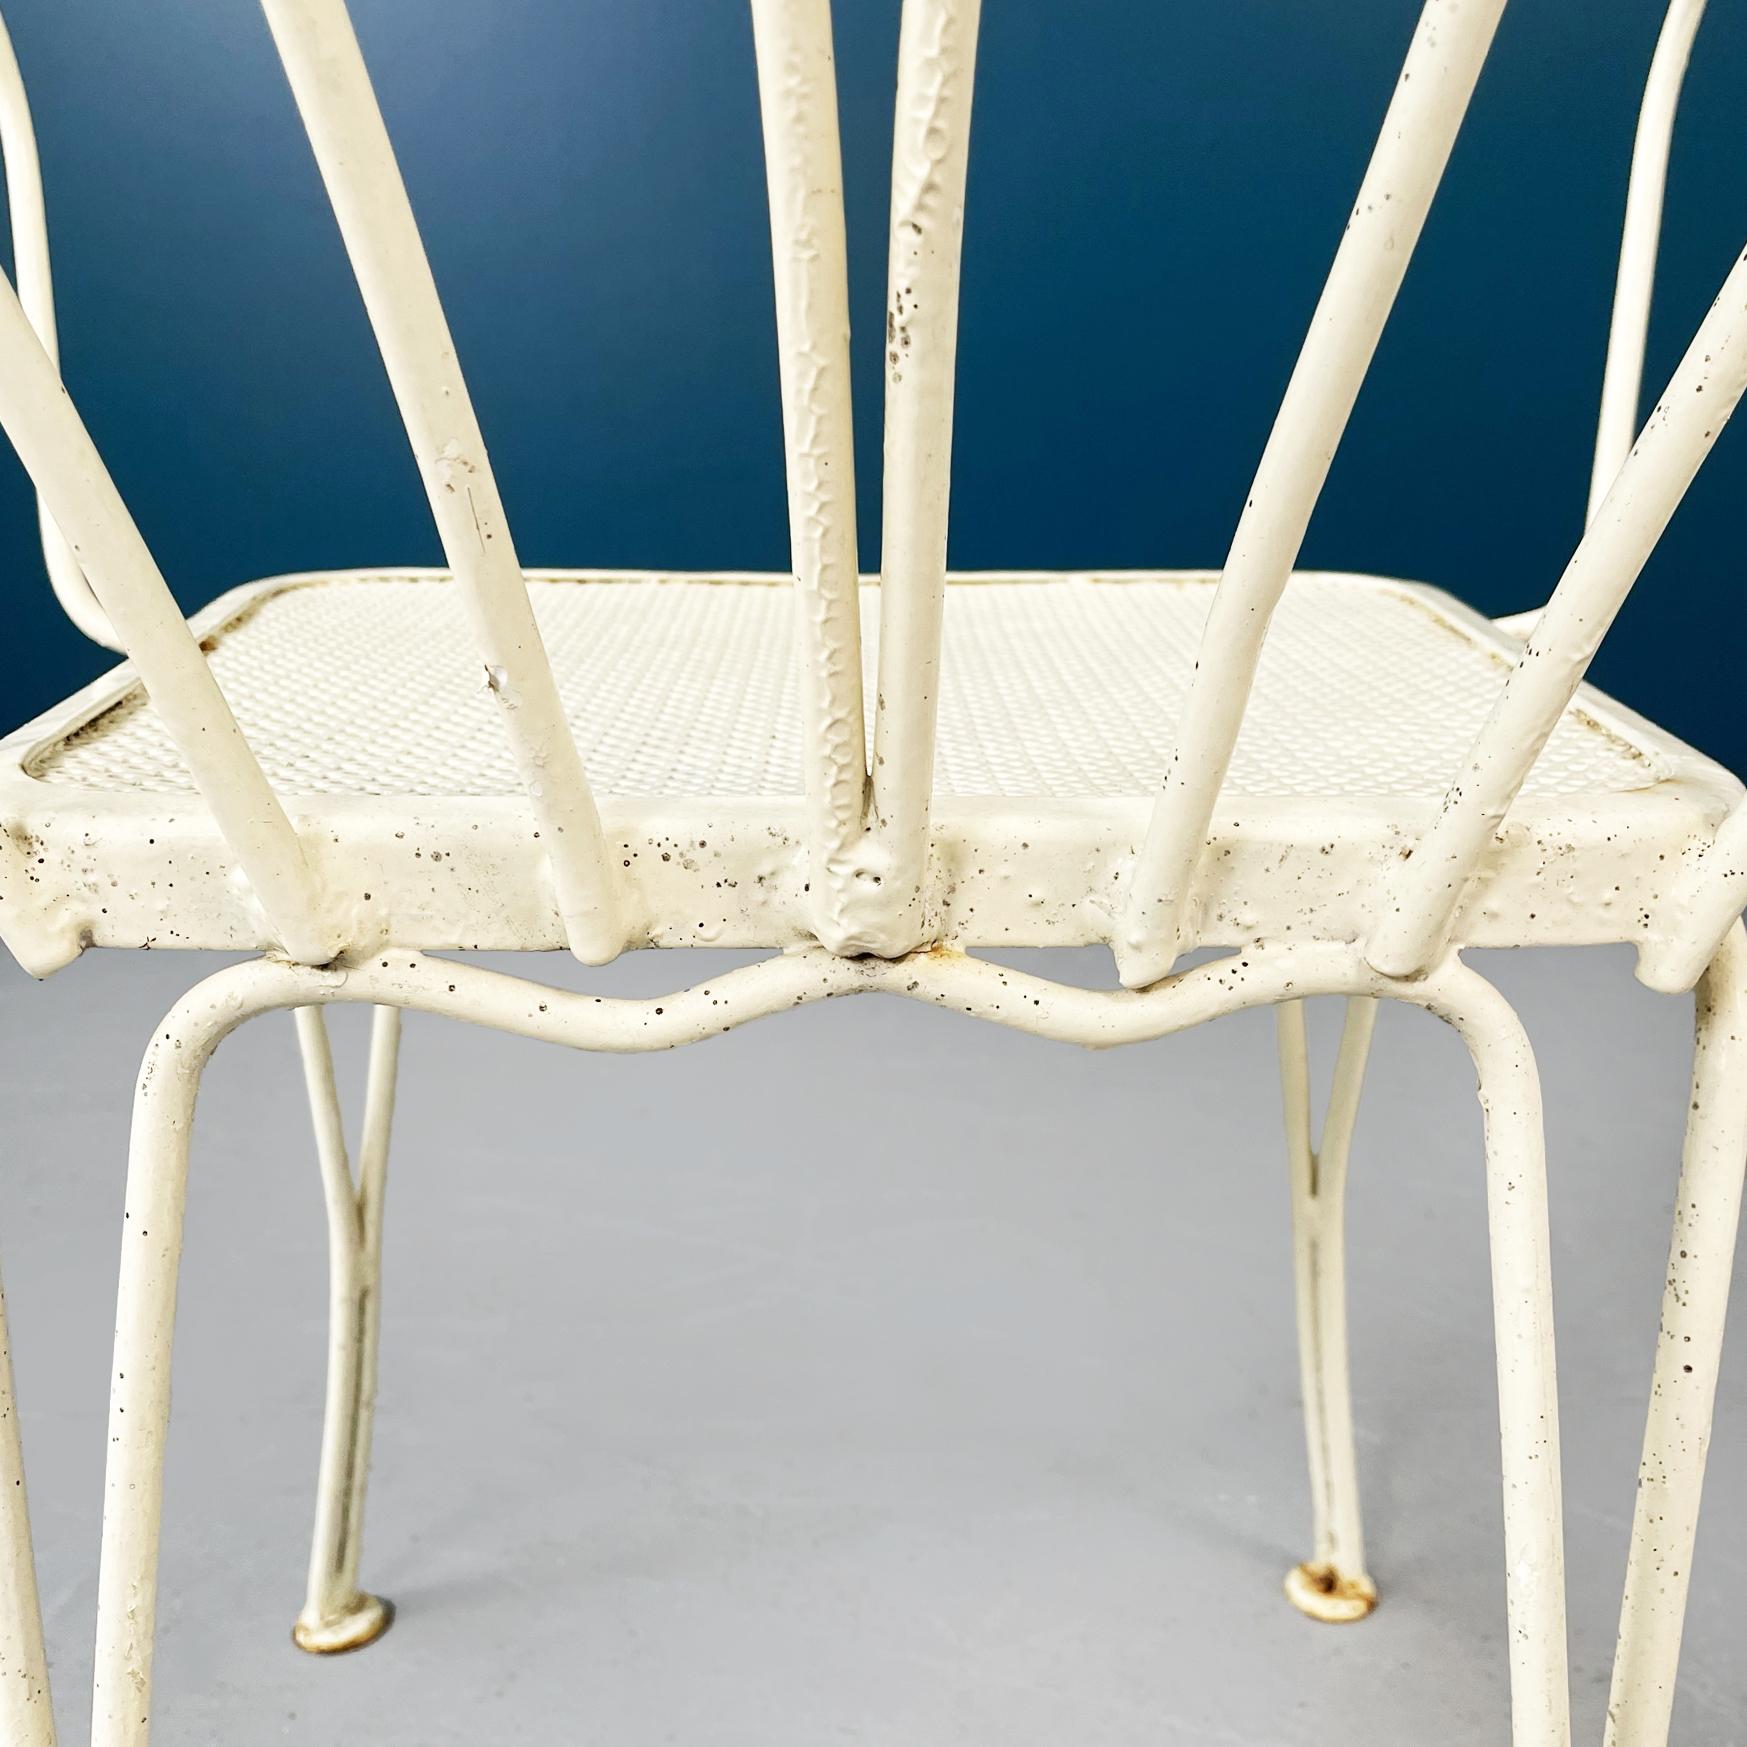 Italian Mid-Century Modern Garden Chairs in White Wrought Iron, 1960s For Sale 7